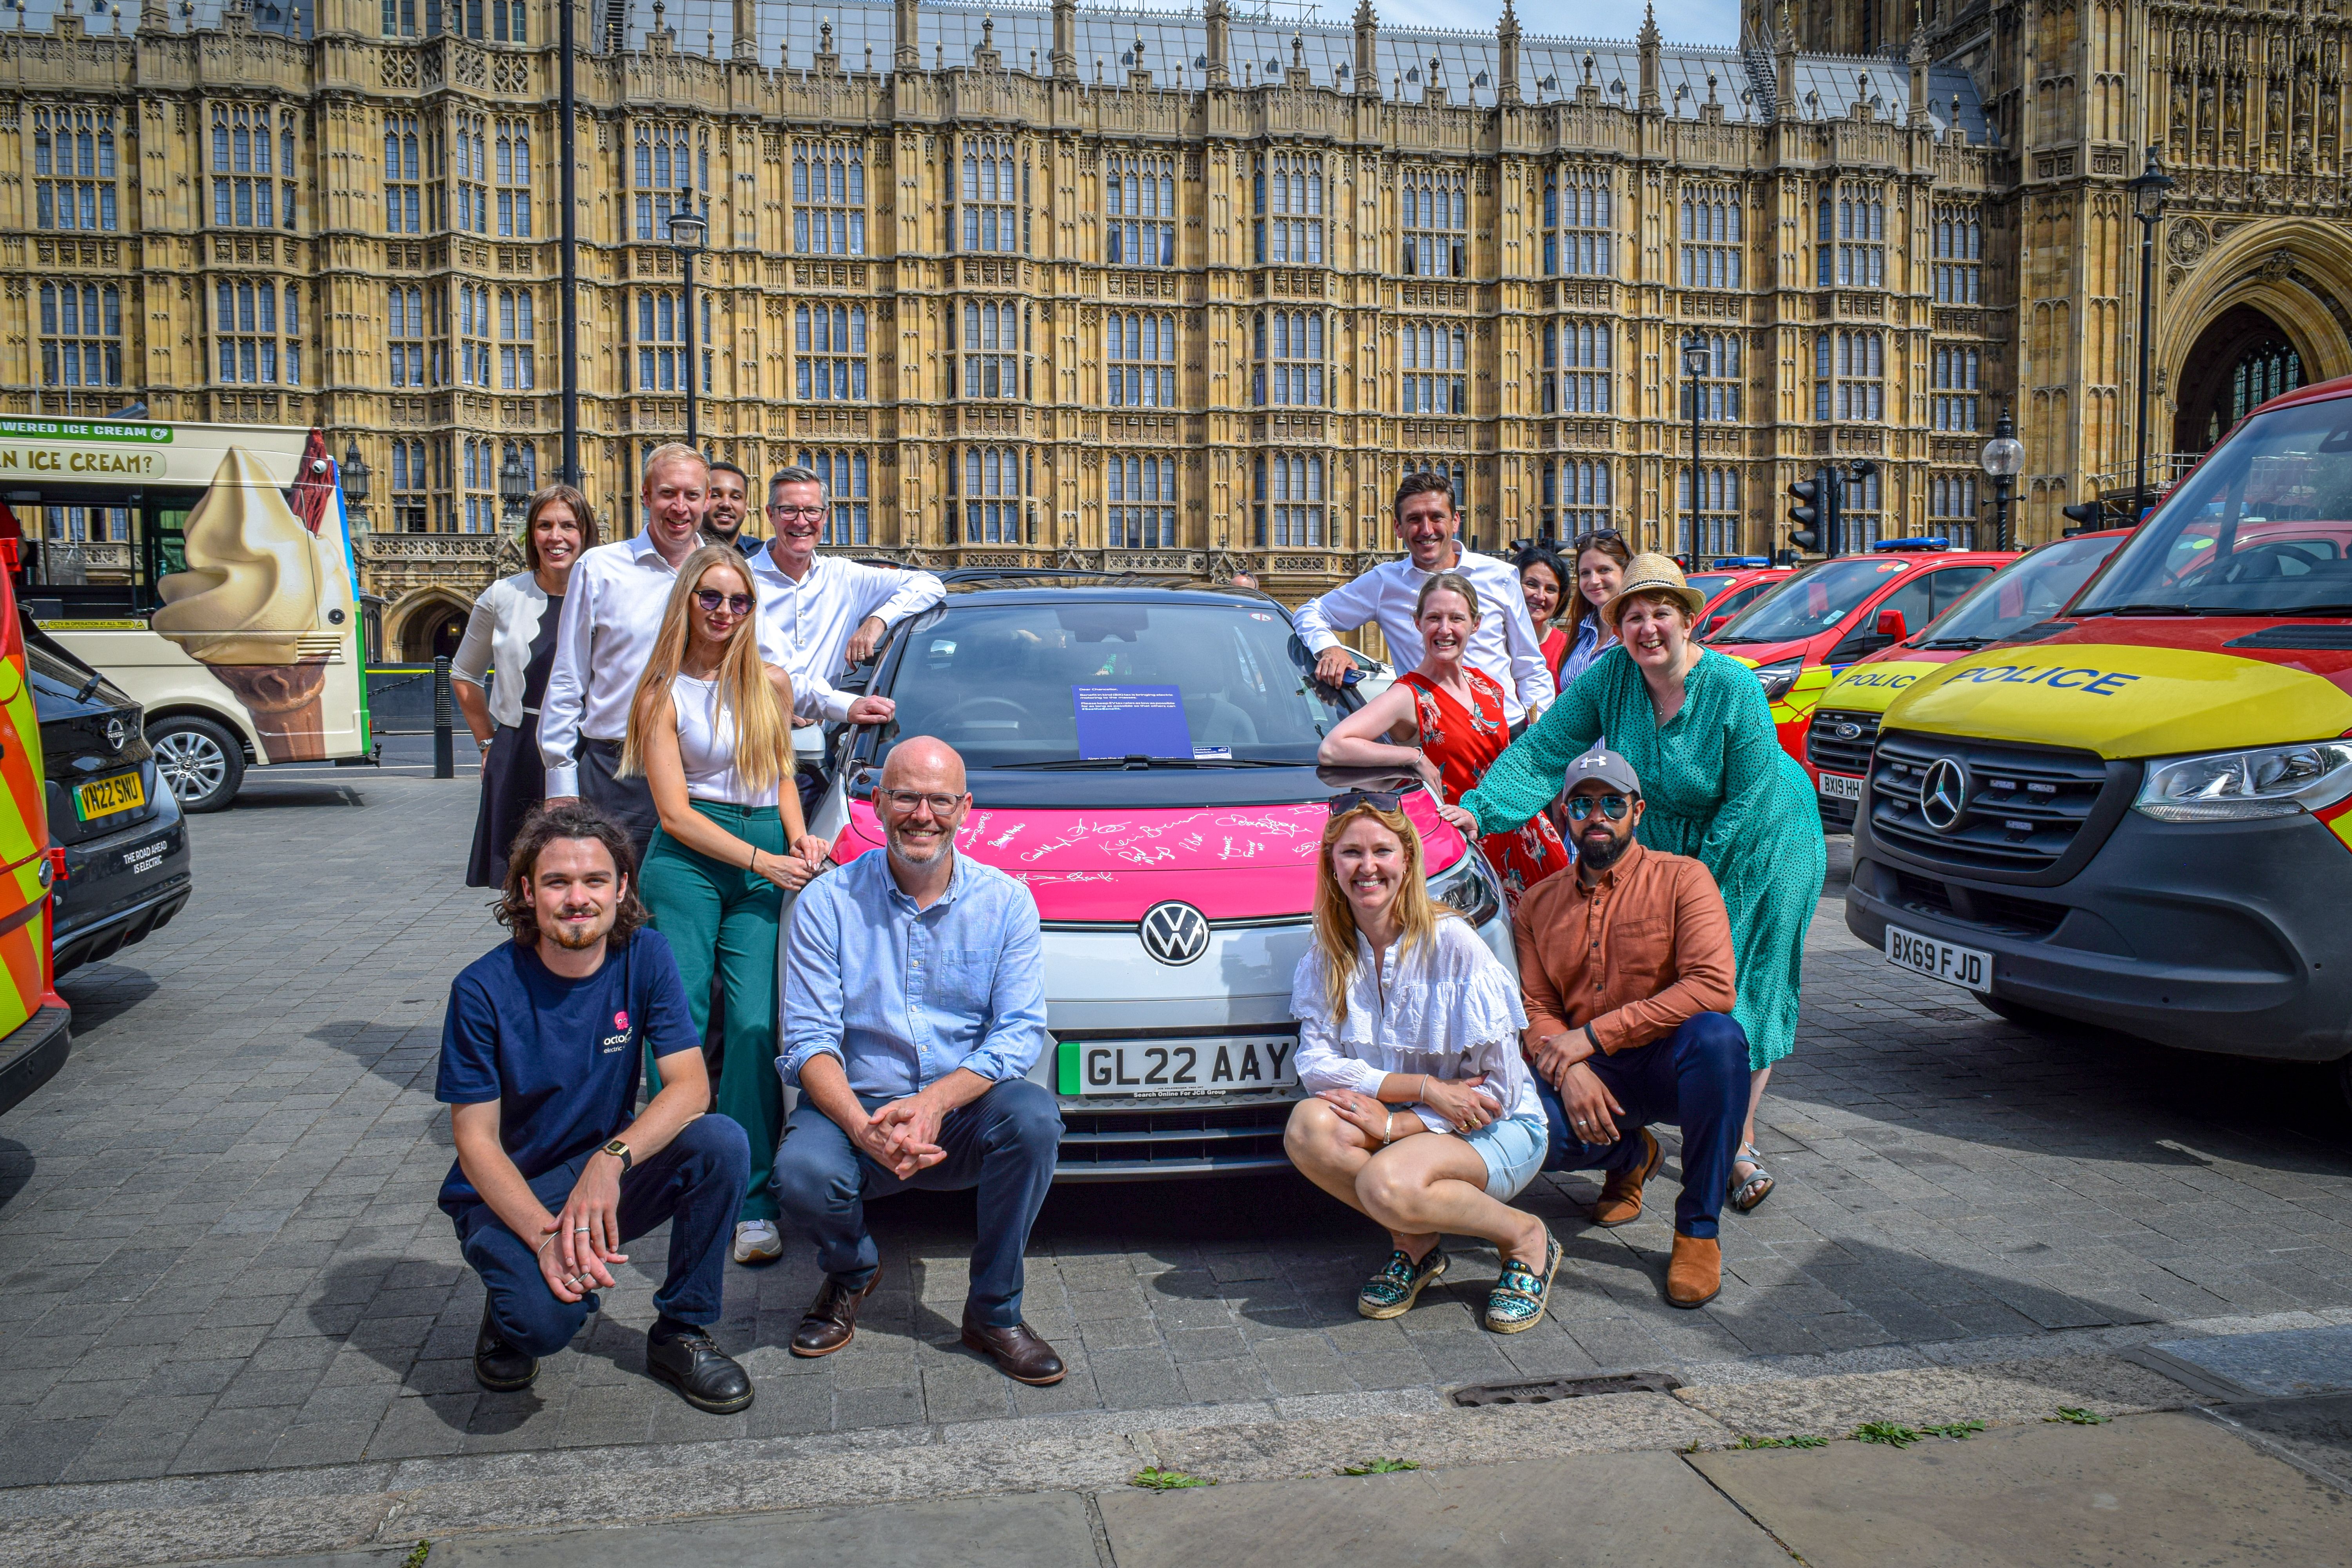 A Happy Octopus Electric Vehicles team in-front of Westminster posing next to an electric vehicle